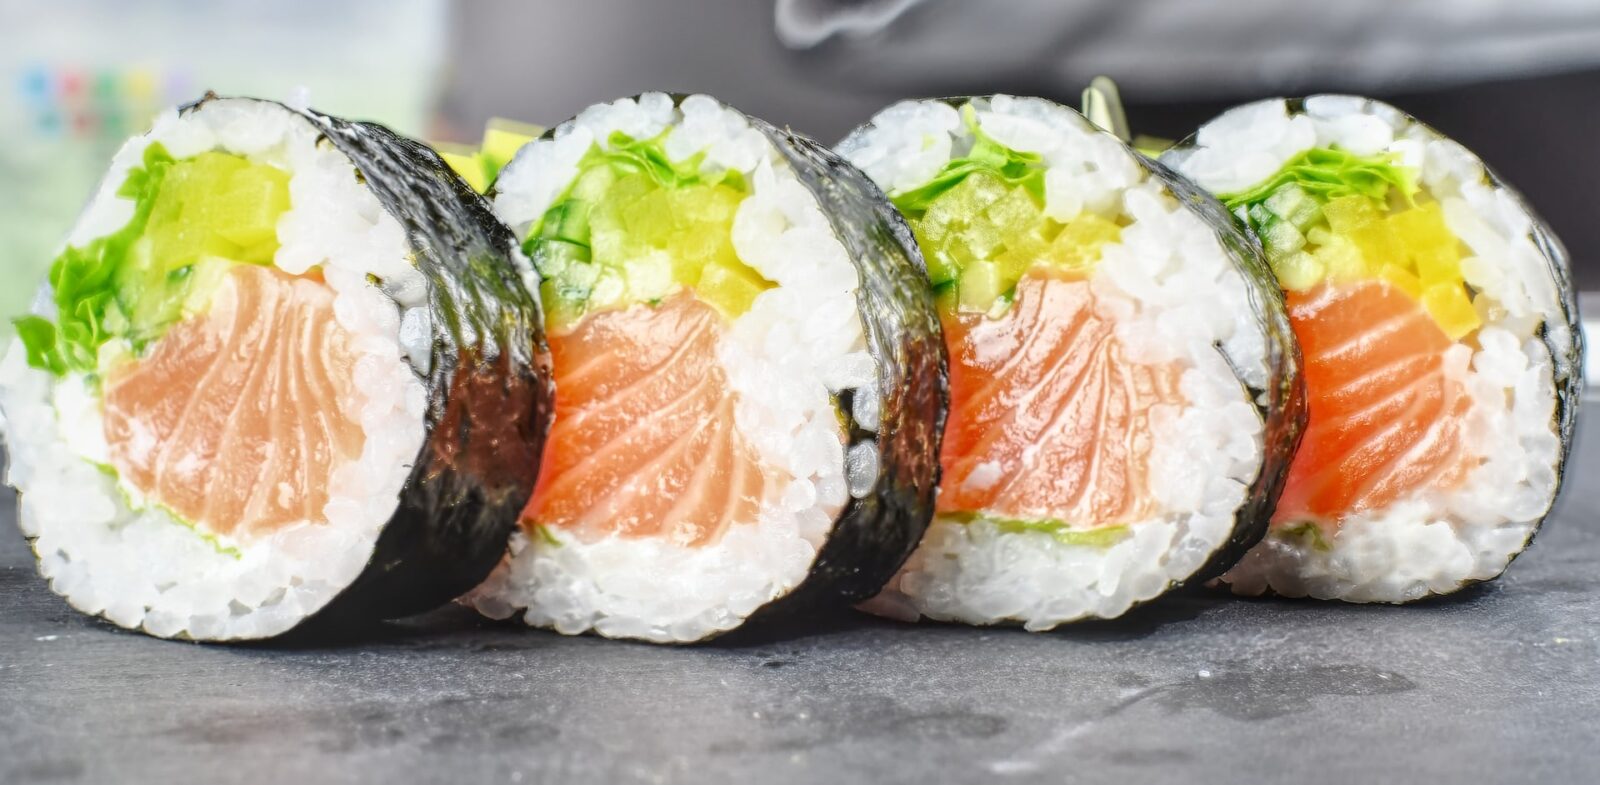 Was ist Sushi - Dein kompletter Sushi Guide